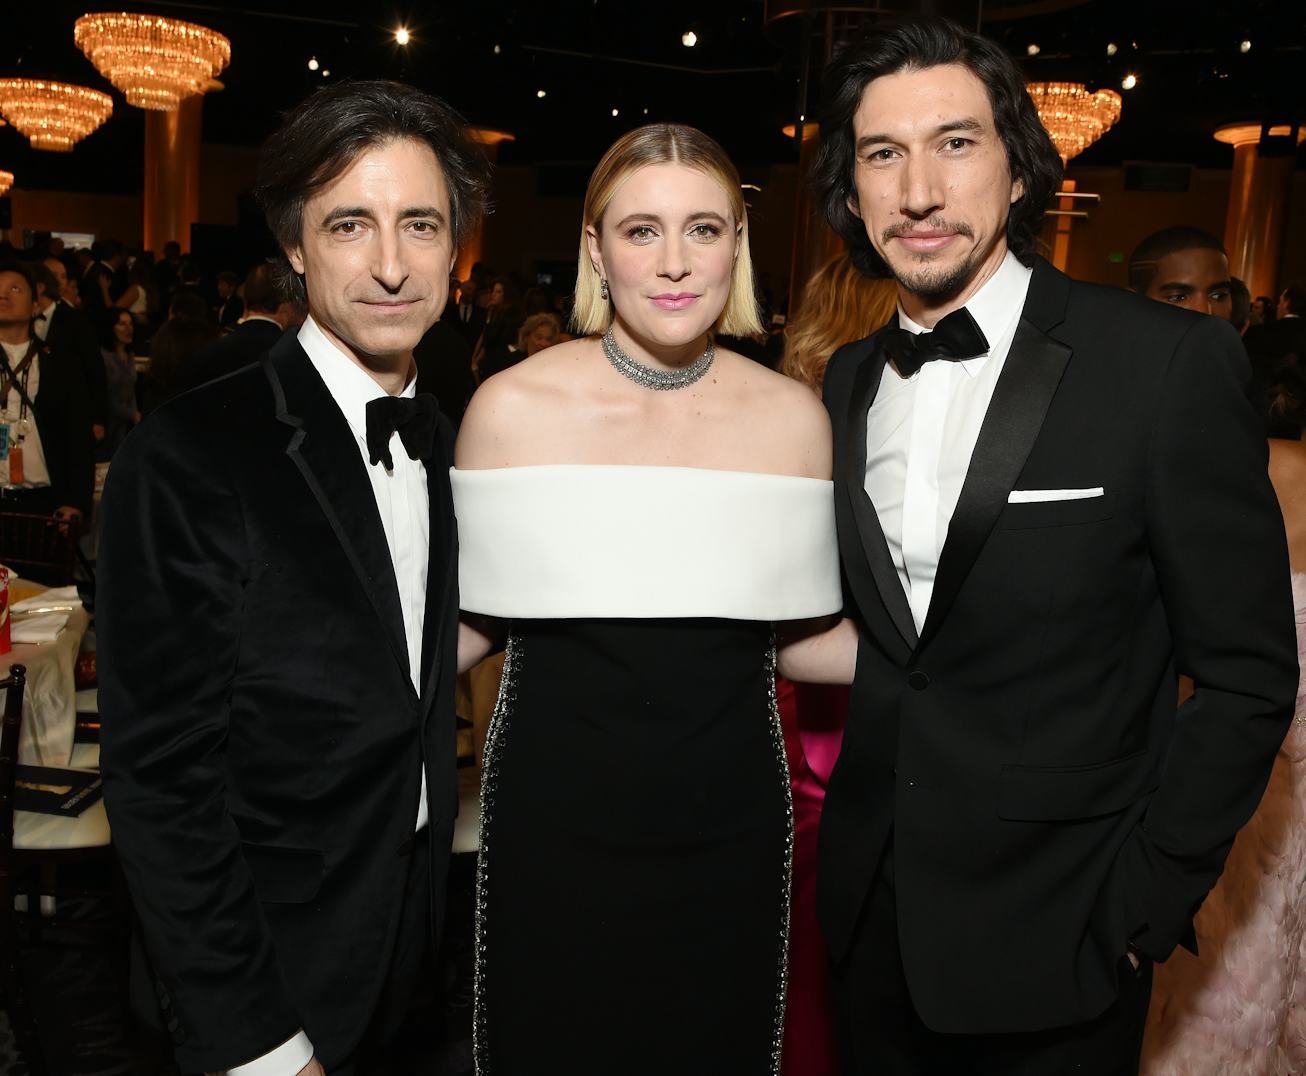 Noah Baumbach, Greta Gerwig, and Adam Driver attend the 77th Annual Golden Globe Awards at The Bever...